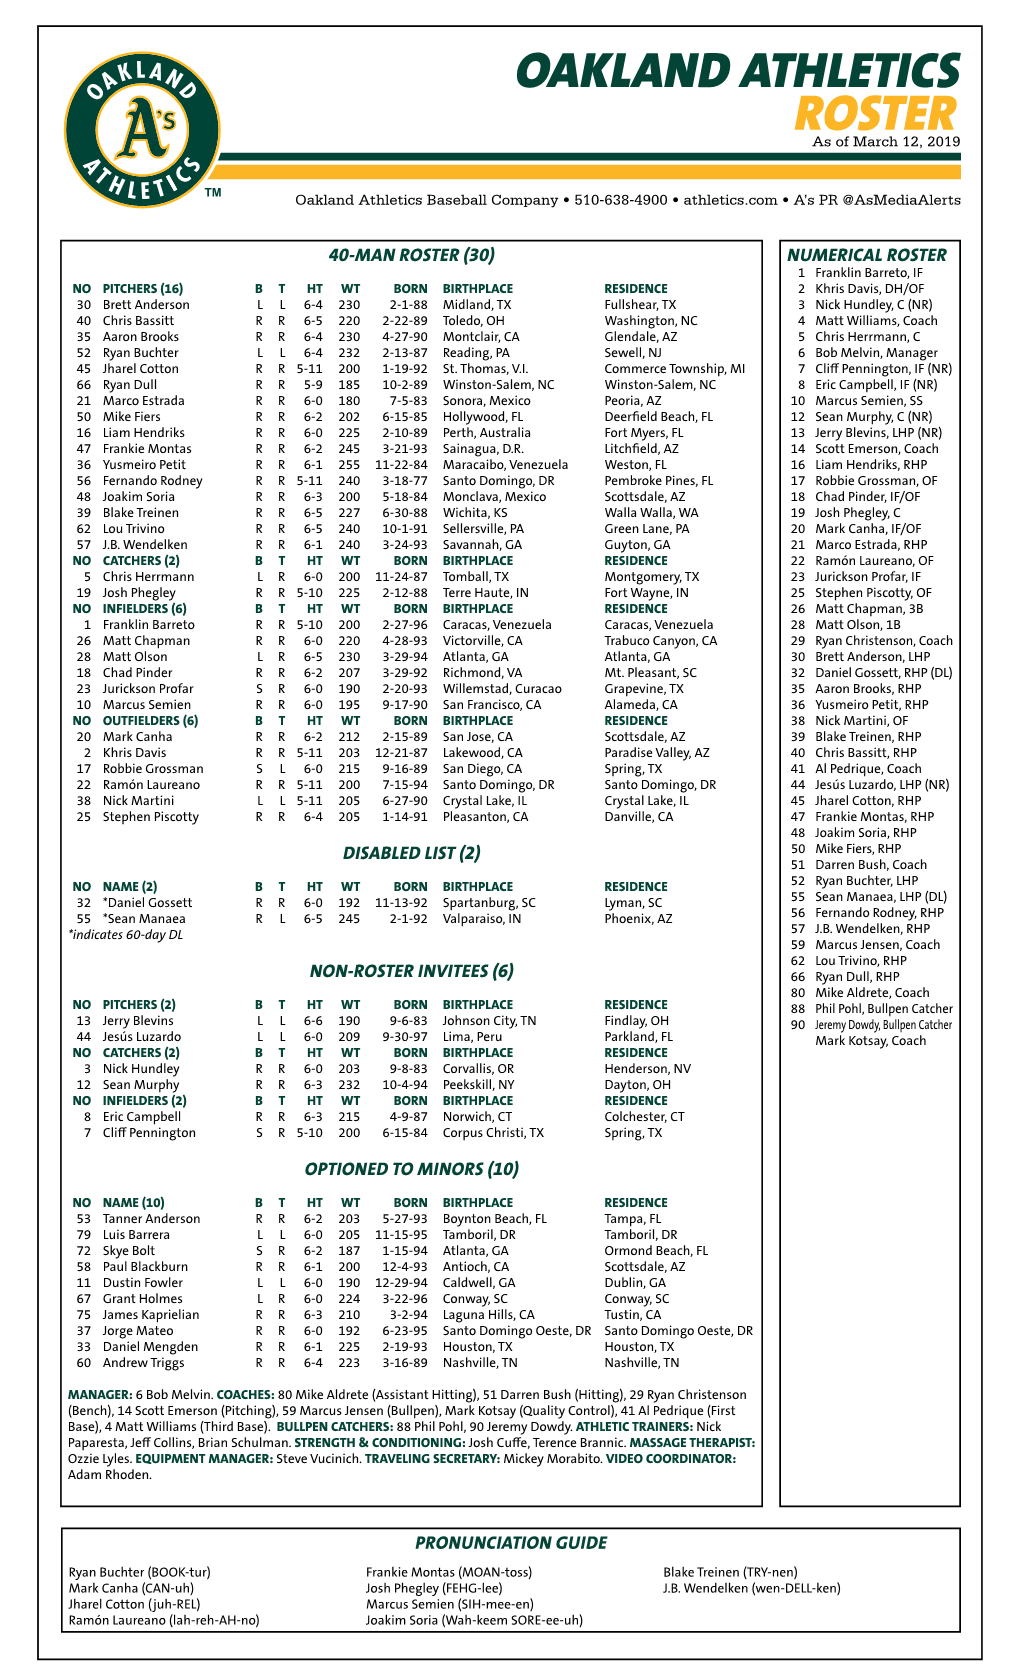 03-12-2019 A's Roster